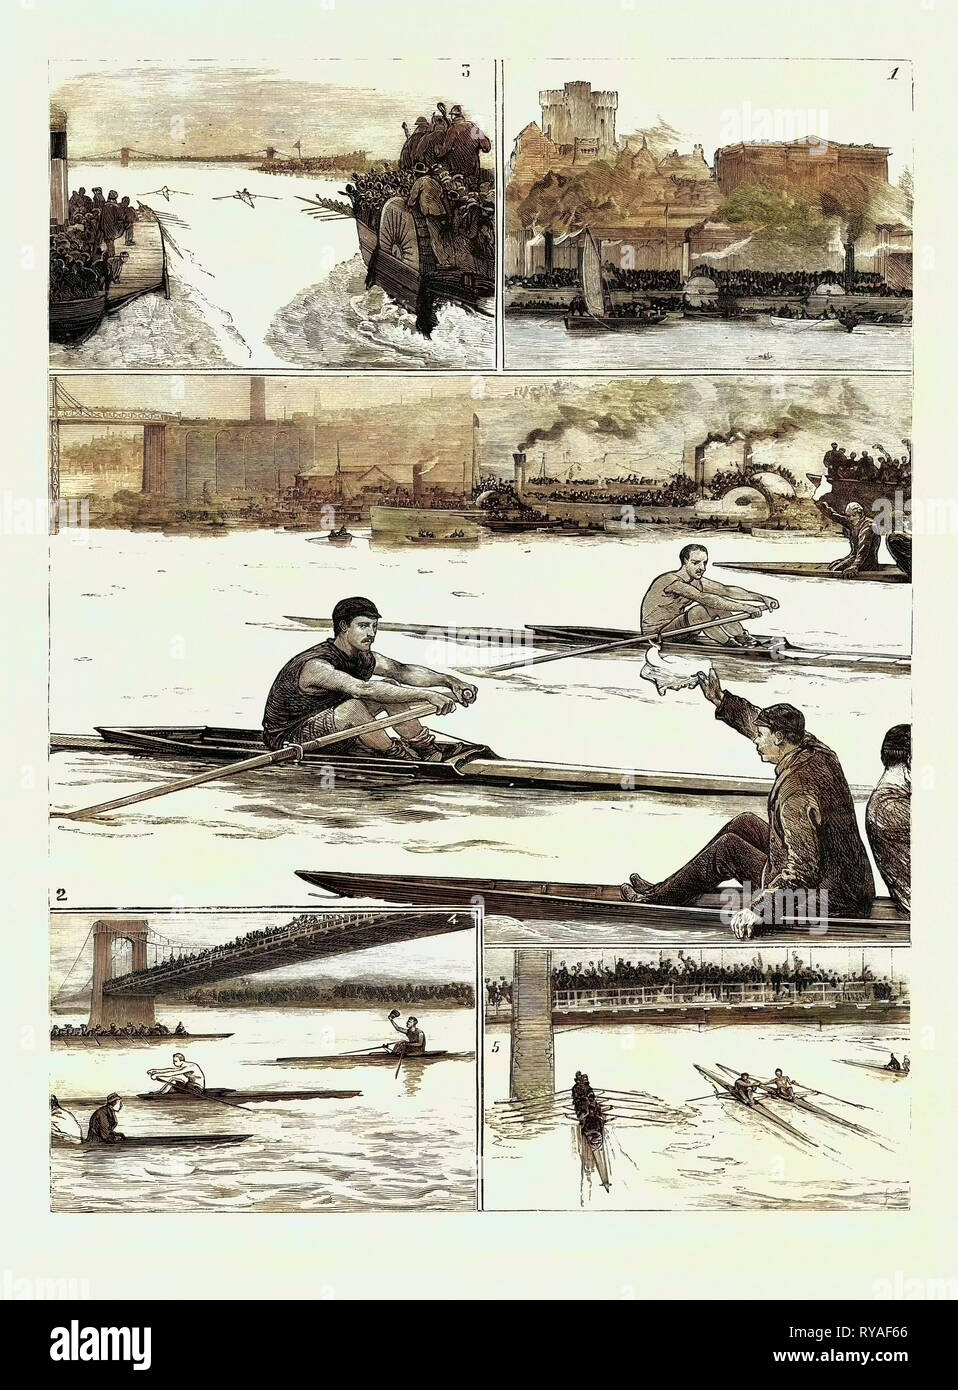 The Sculling Match on the Tyne Between Hanlan and Boyd for the Championship of the World: 1. Before the Start, 2. 'Neck and Neck:' a Minute after the Start, 3. In Sight of the Chain Bridge, 4. The End of the Race, 5. After the Finish: Shaking Hands Stock Photo